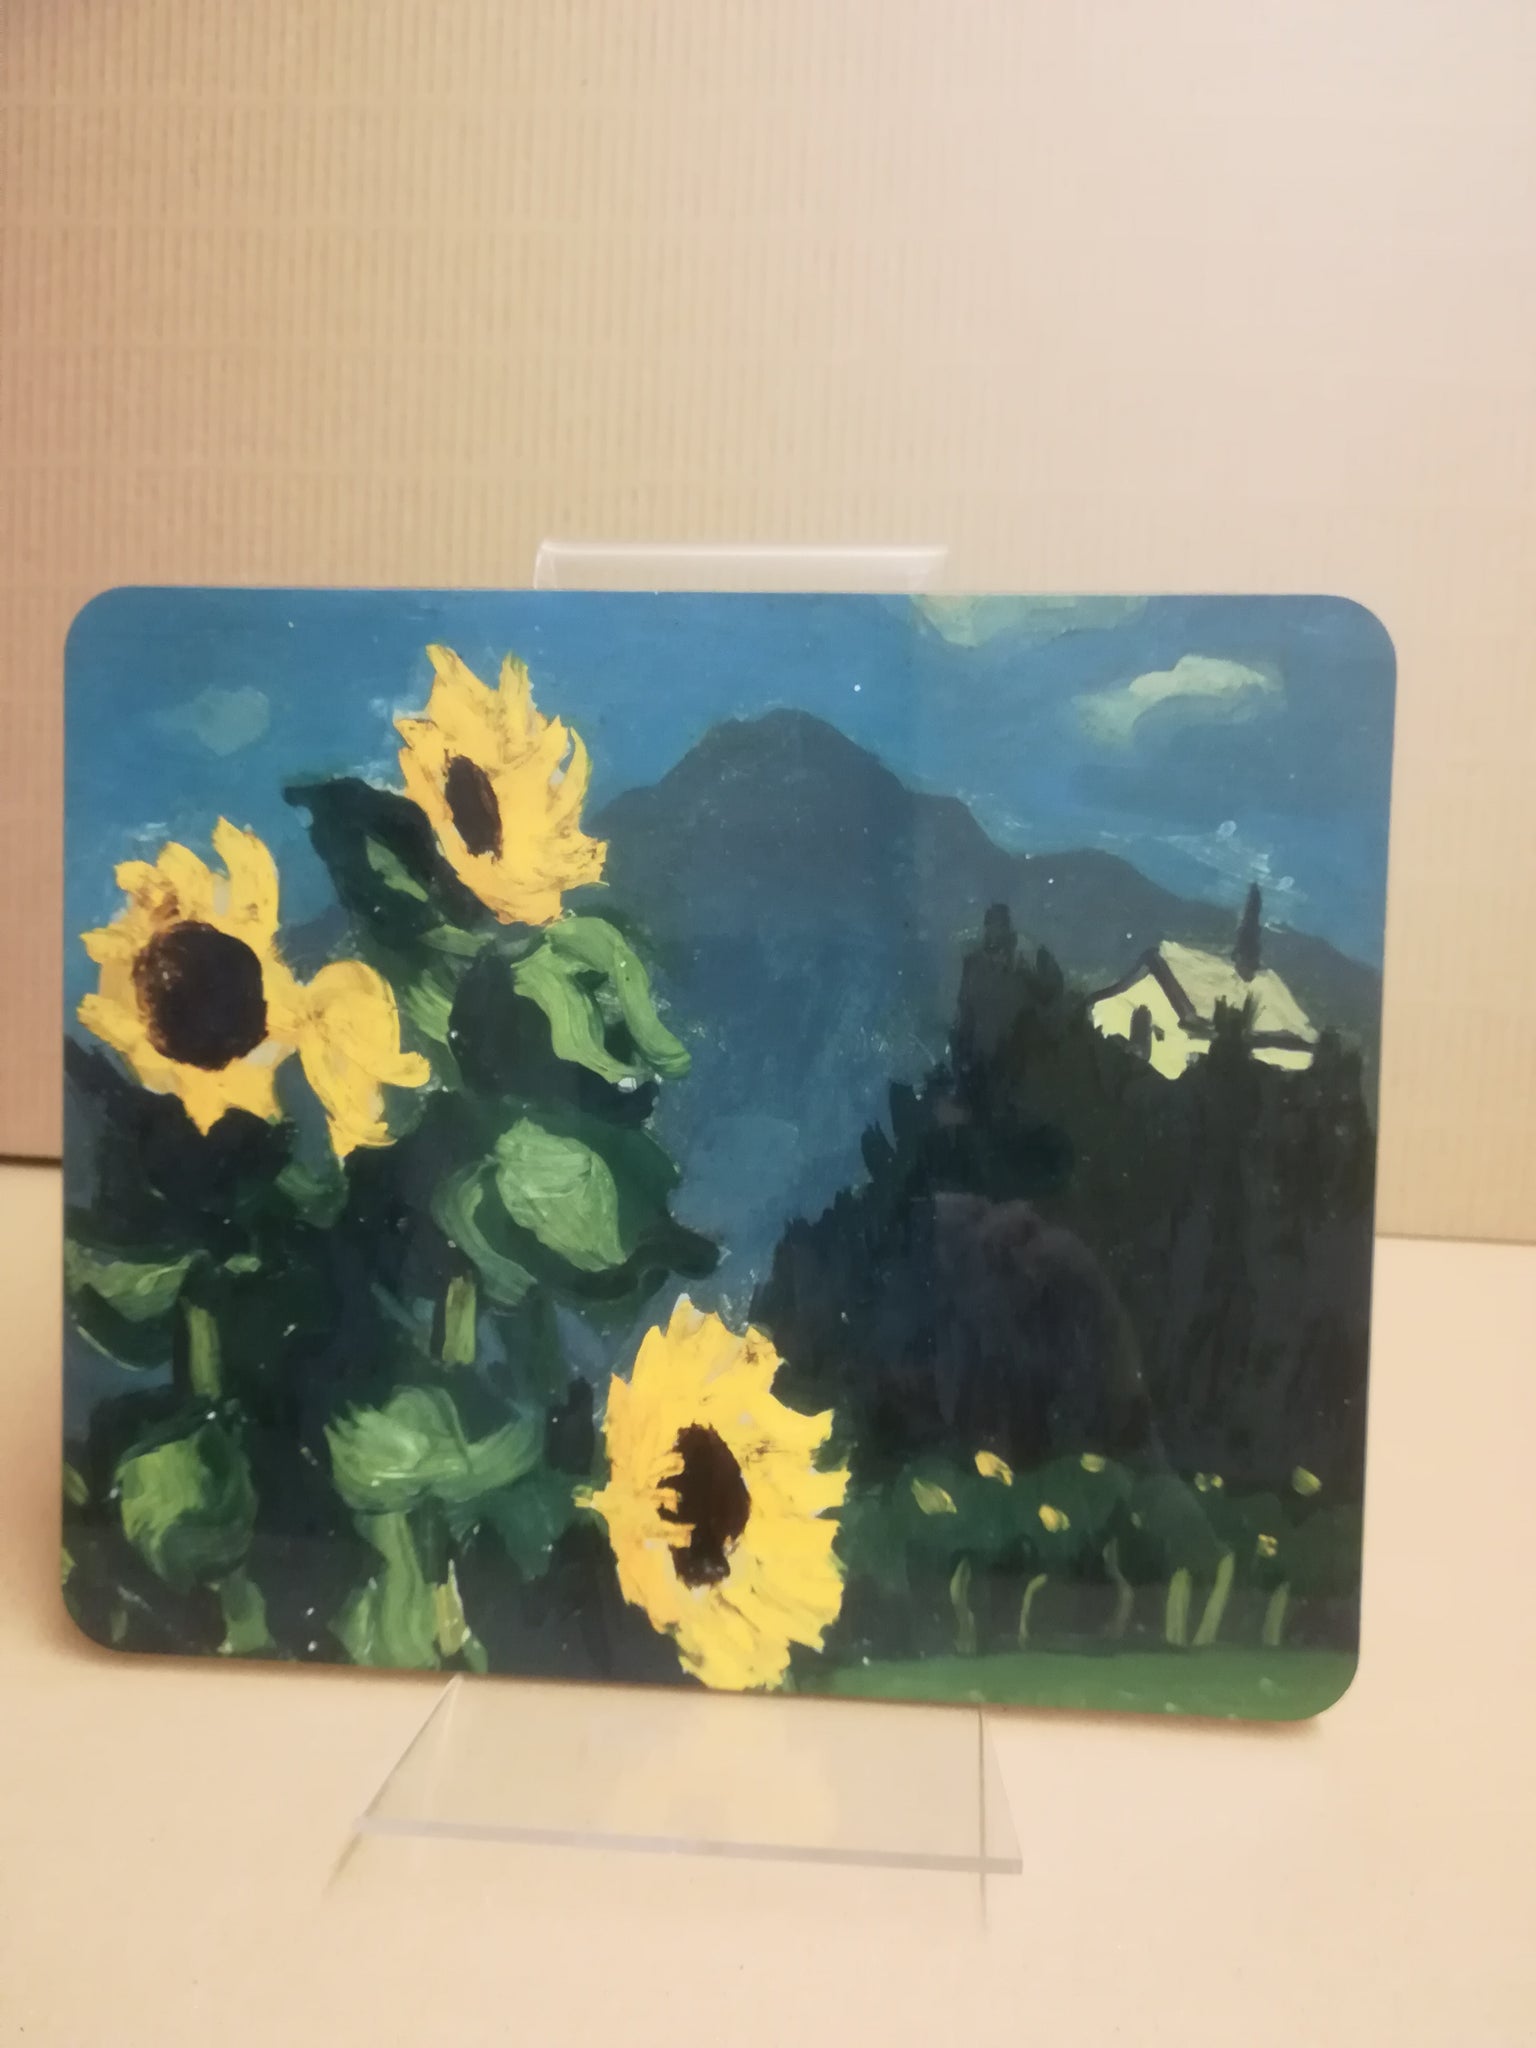 Sunflowers with mountains beyond - Syr Kyffin Williams Mat Bwrdd